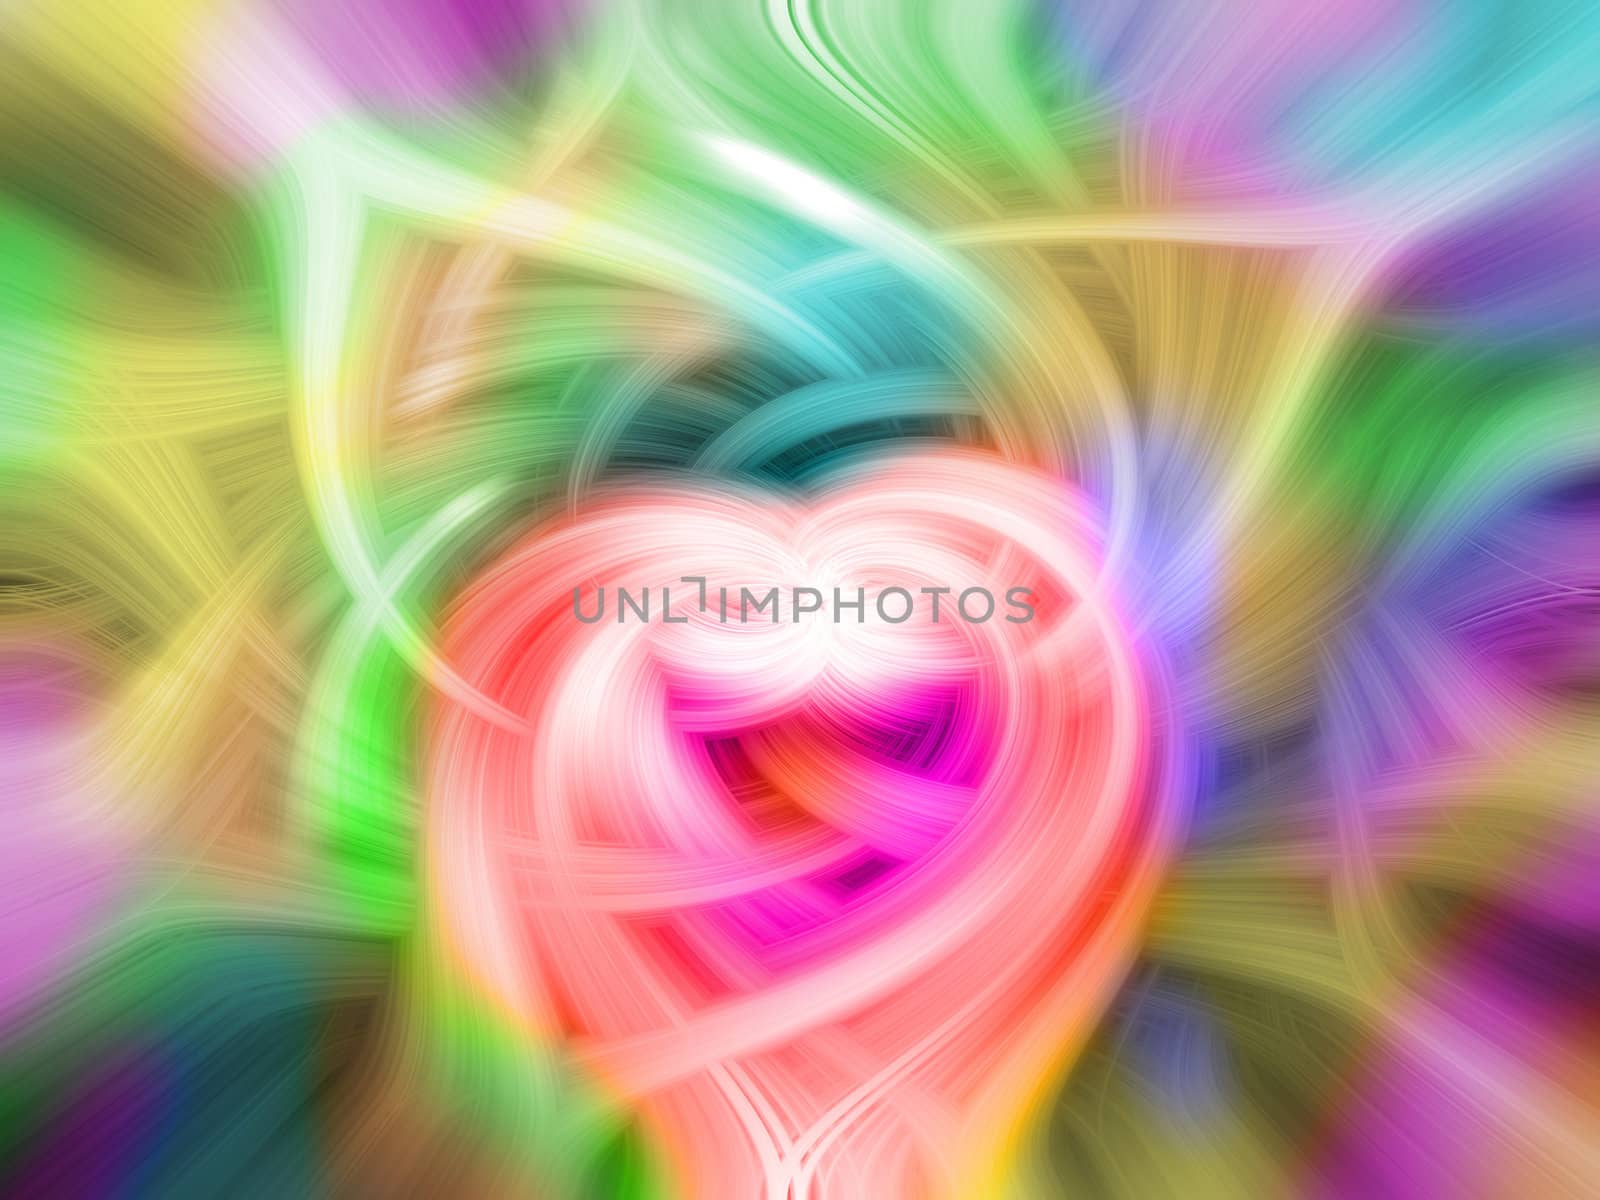 Heart illustration on abstract multi coloured background